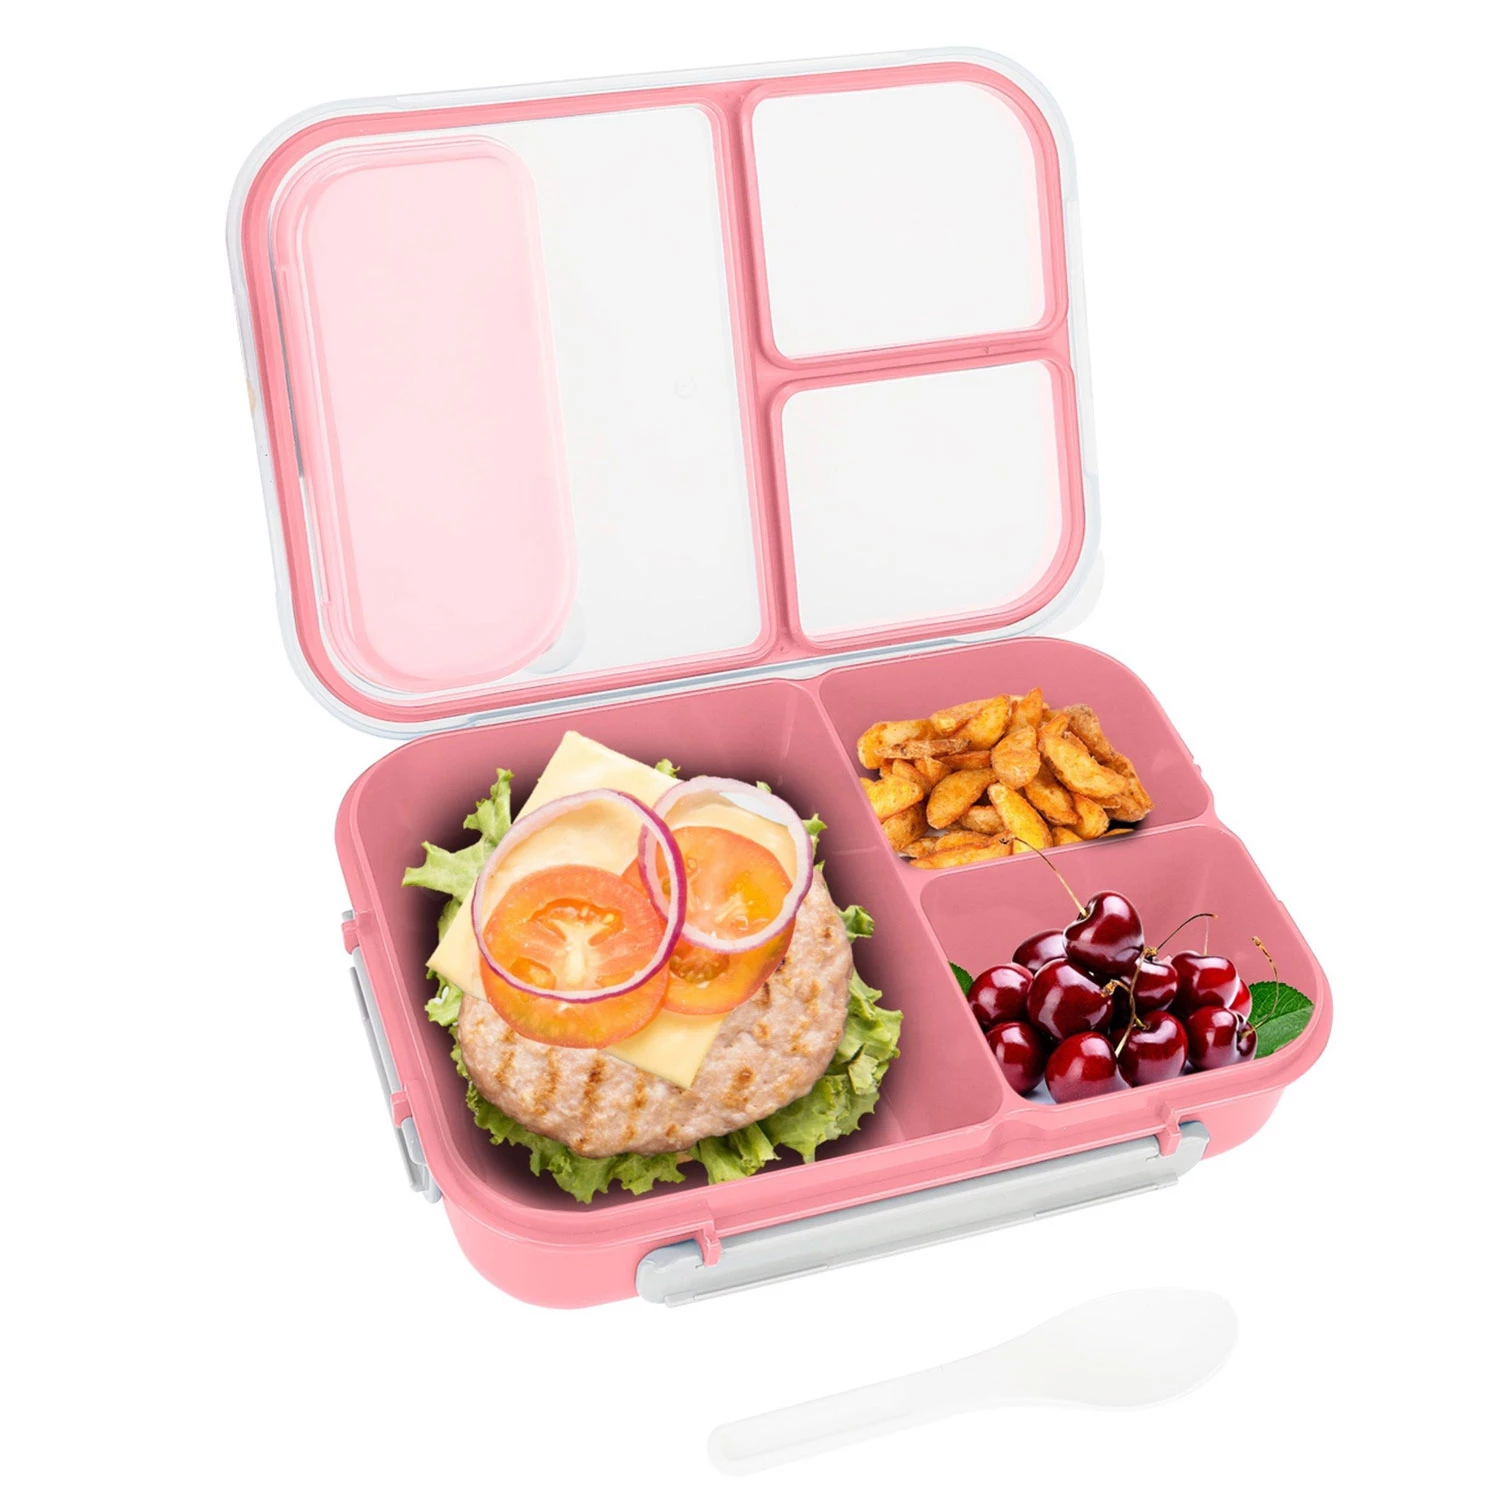 Leak-proof Lunch Box with 3 Compartments - Portable Food Storage